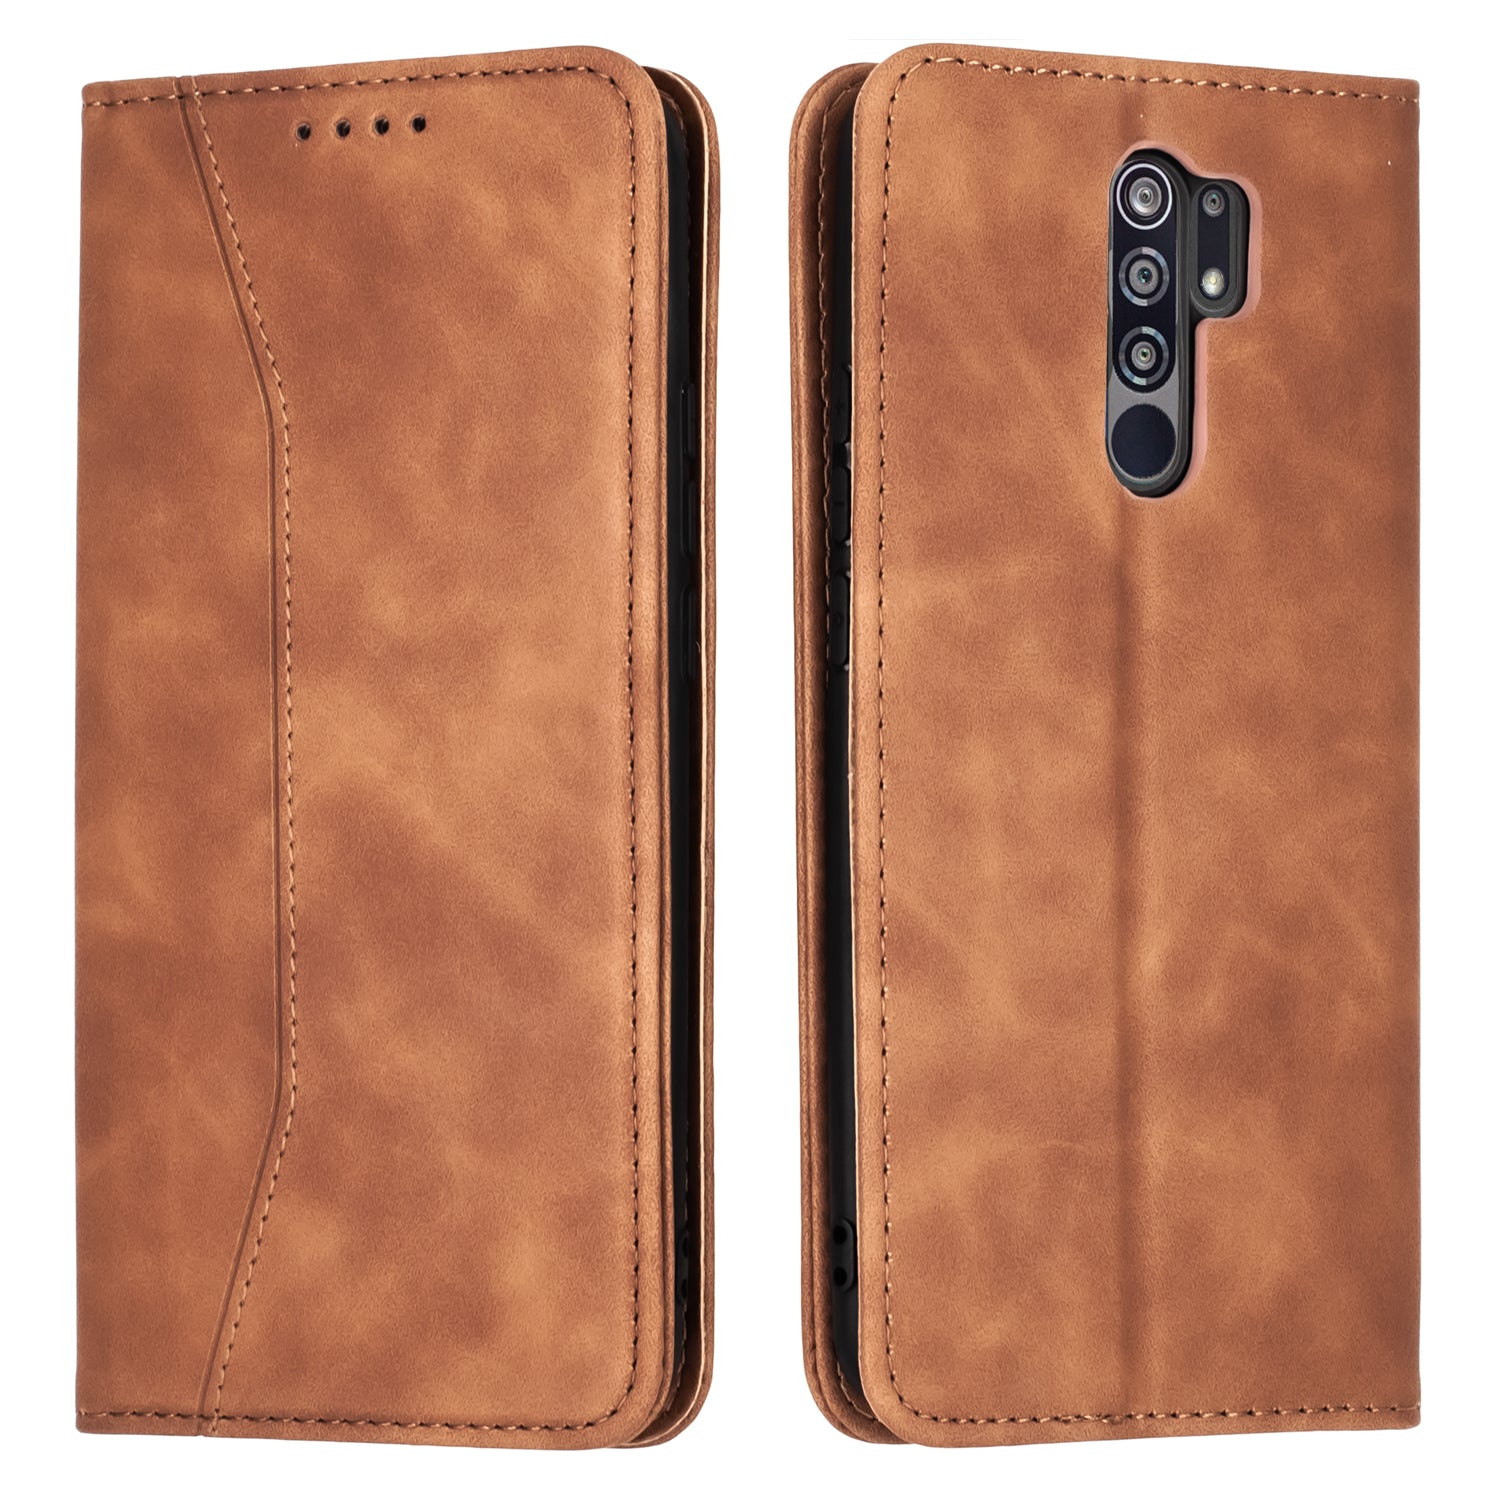 Bodycell Book Elegant Leather Wallet Case for XIAOMI - Redmi 9 - Tan - Brown 